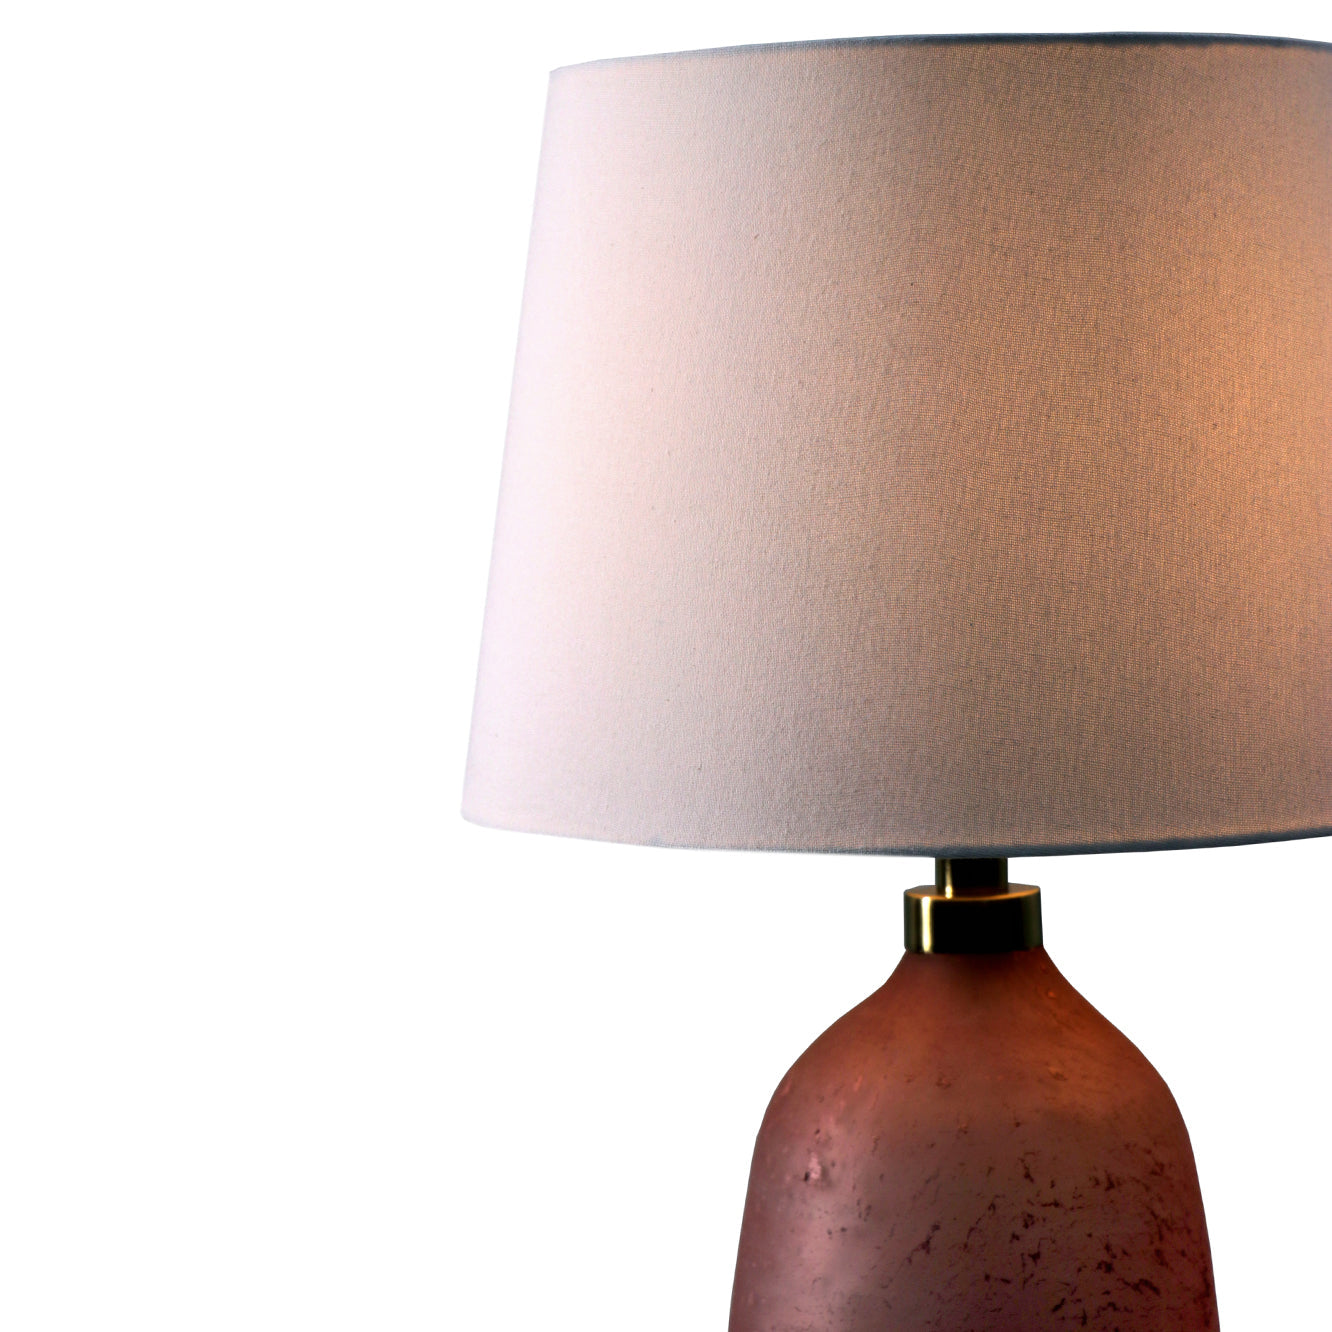 Walze Light Table Lamp by homeblitz.in